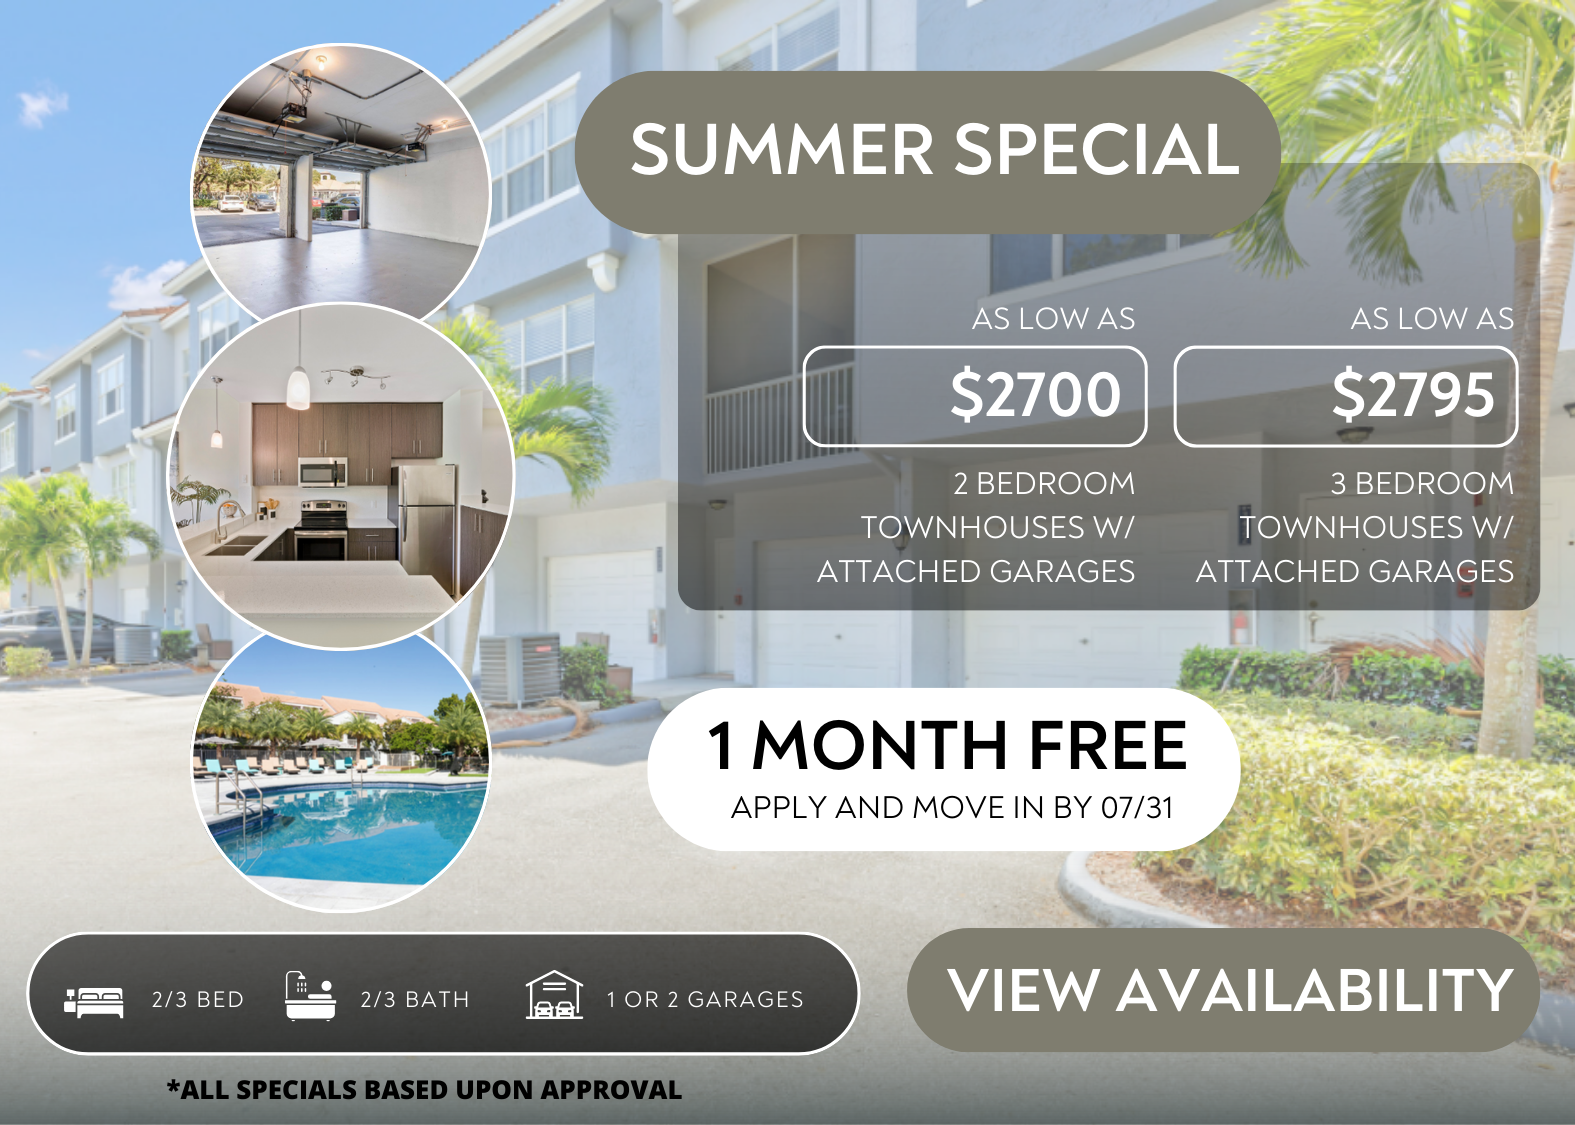 Summer Special! As low as $2,700 for 2-Bedroom Townhouses with Attached Garages and $2,795 for 3-Bedroom Townhouses with Attached Garages. 1 Month Free - Apply and Move in By 7/31